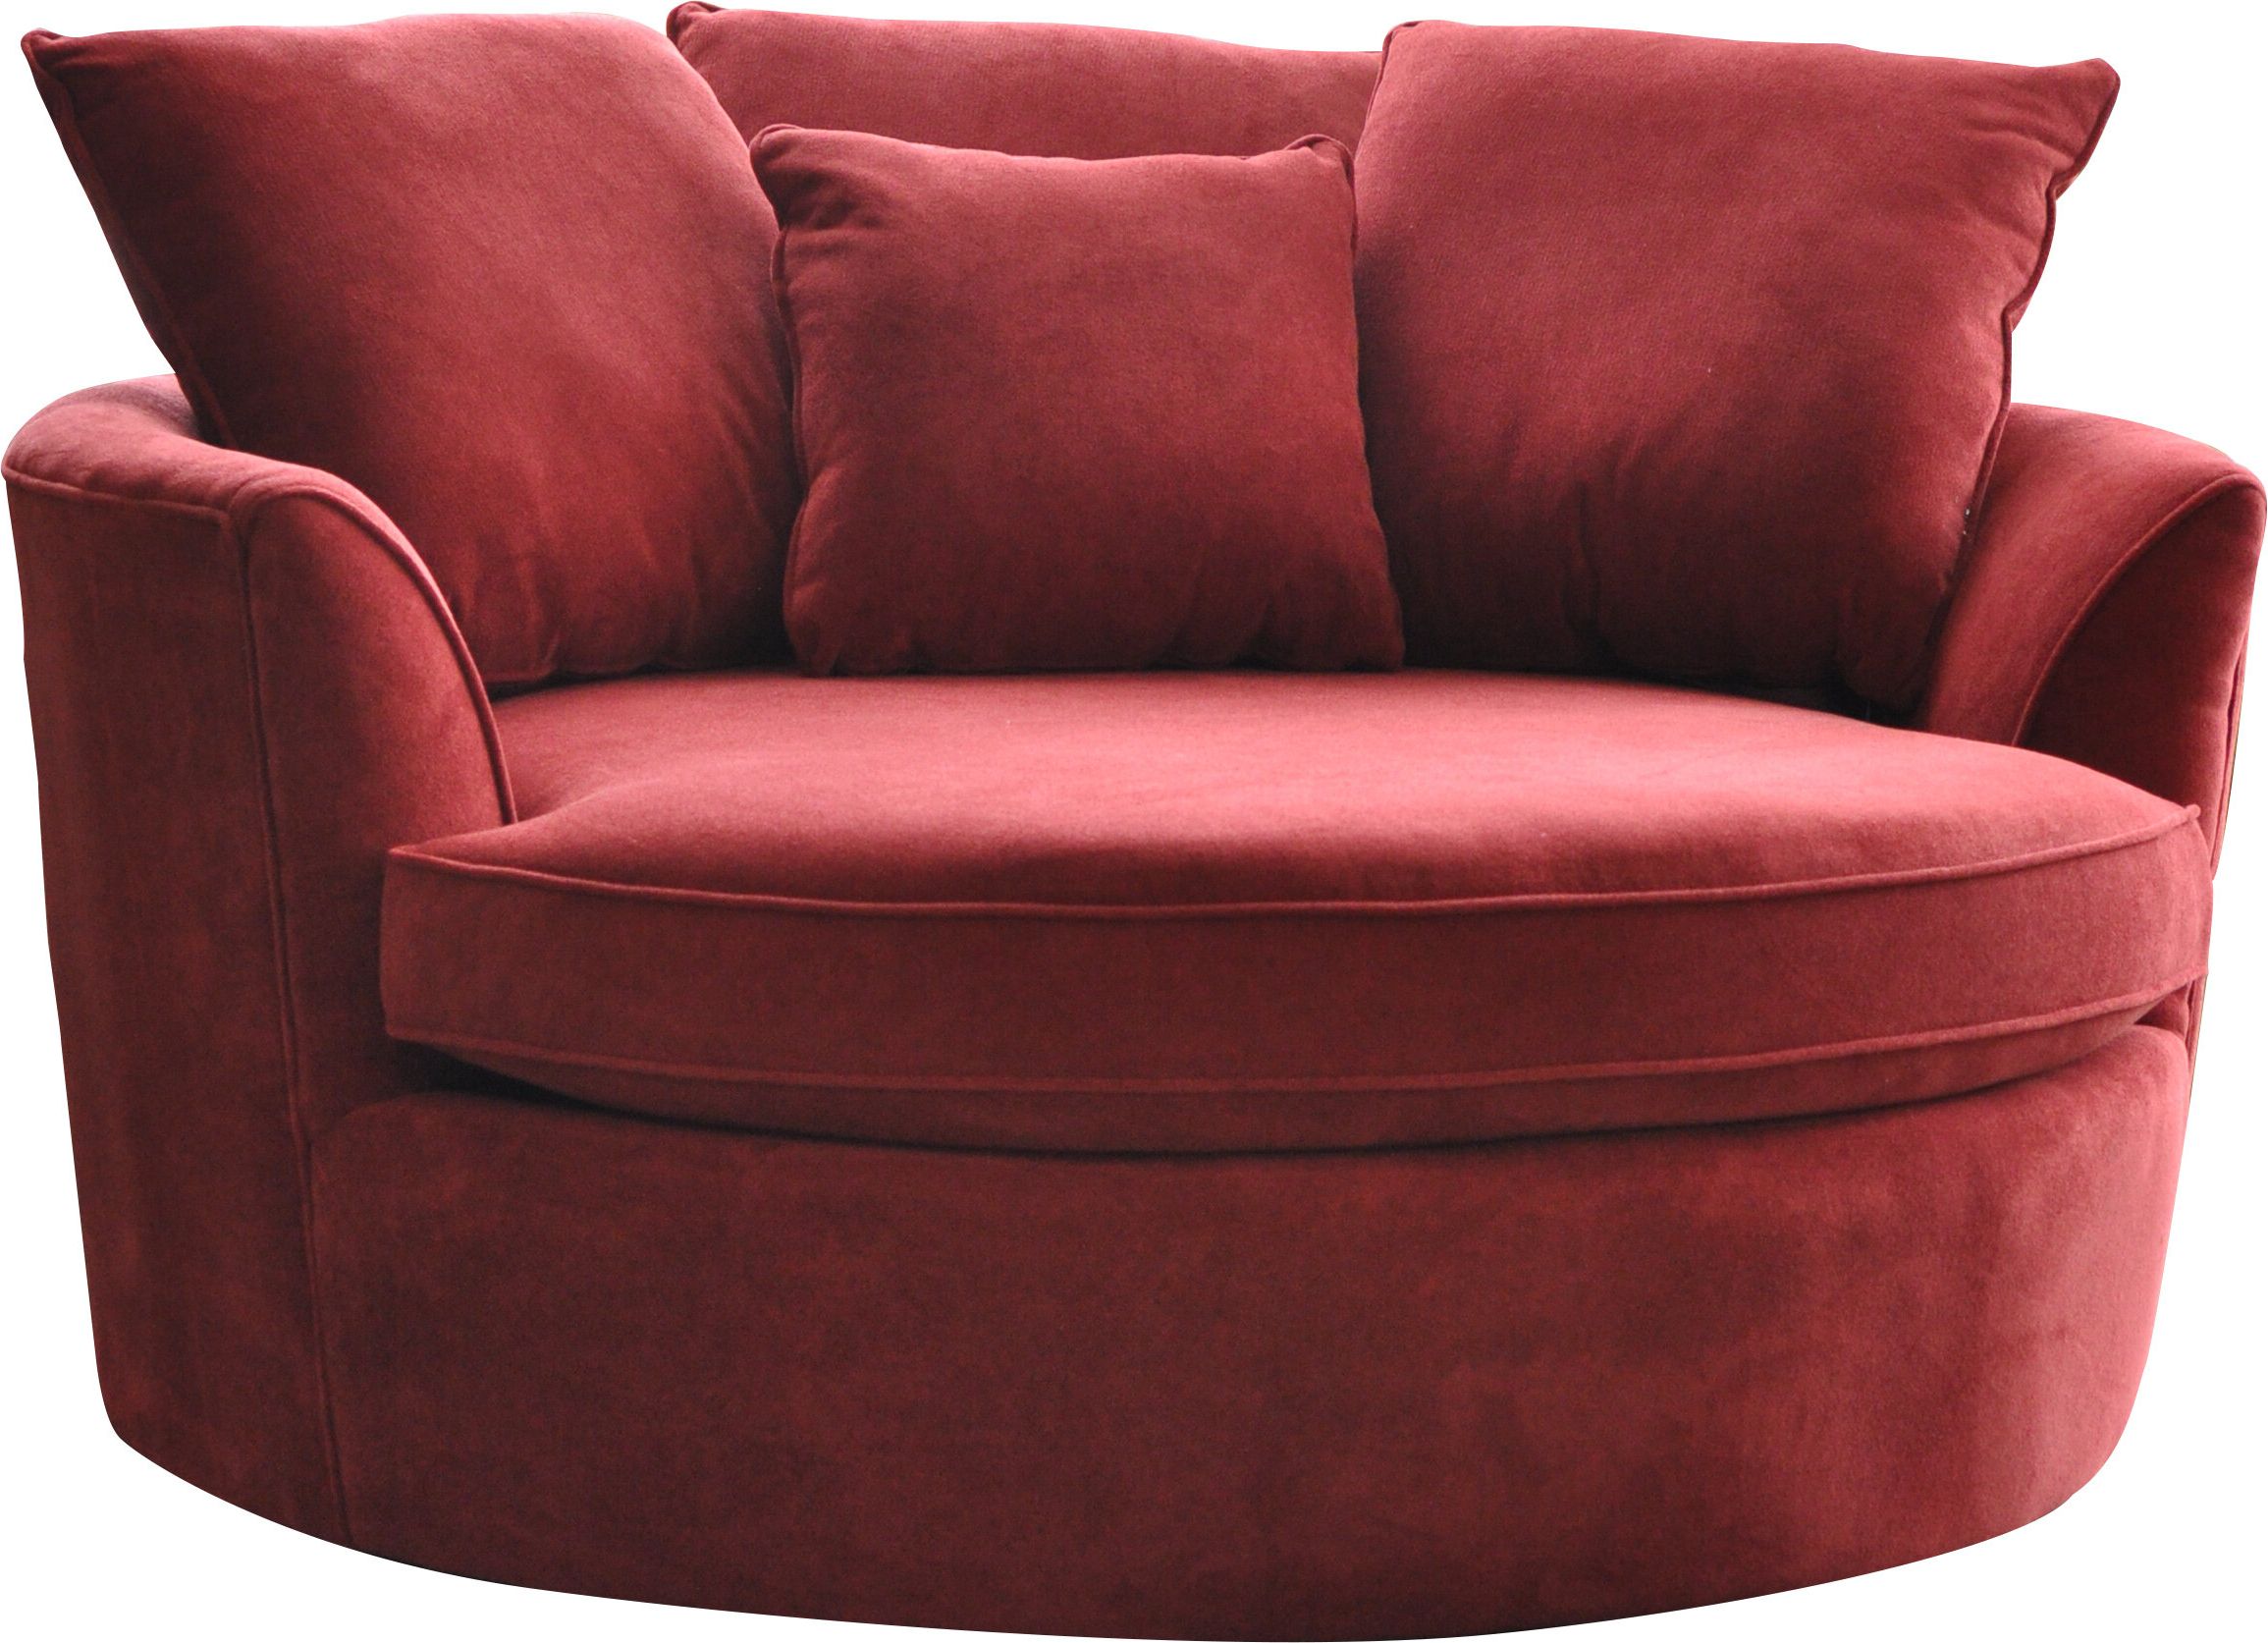 Laurel Foundry Modern Farmhouse Marta Barrel Chair In Most Recent Vineland Polyester Swivel Armchairs (View 14 of 20)